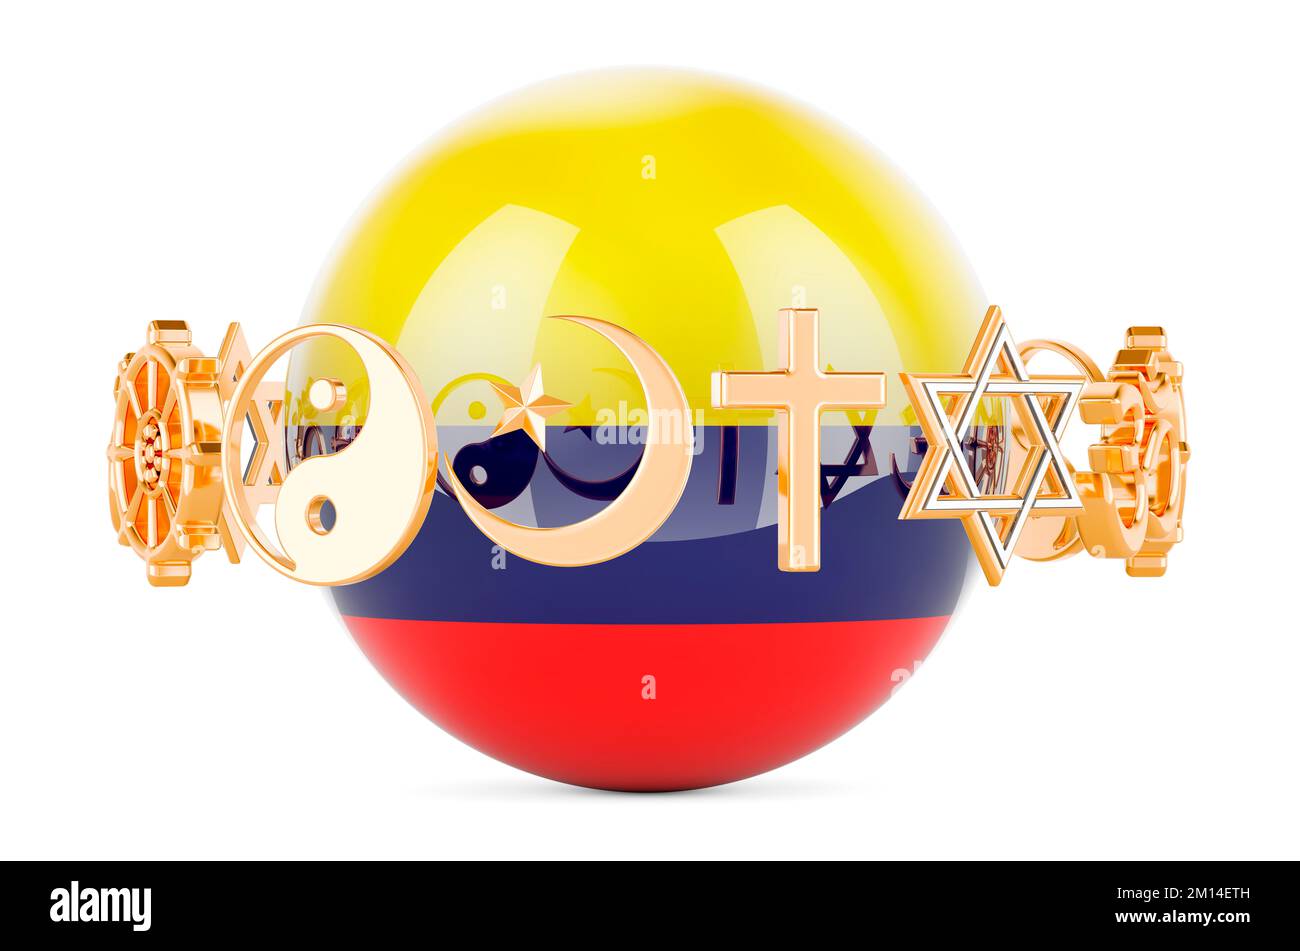 Colombian flag painted on sphere with religions symbols around, 3D rendering isolated on white background Stock Photo